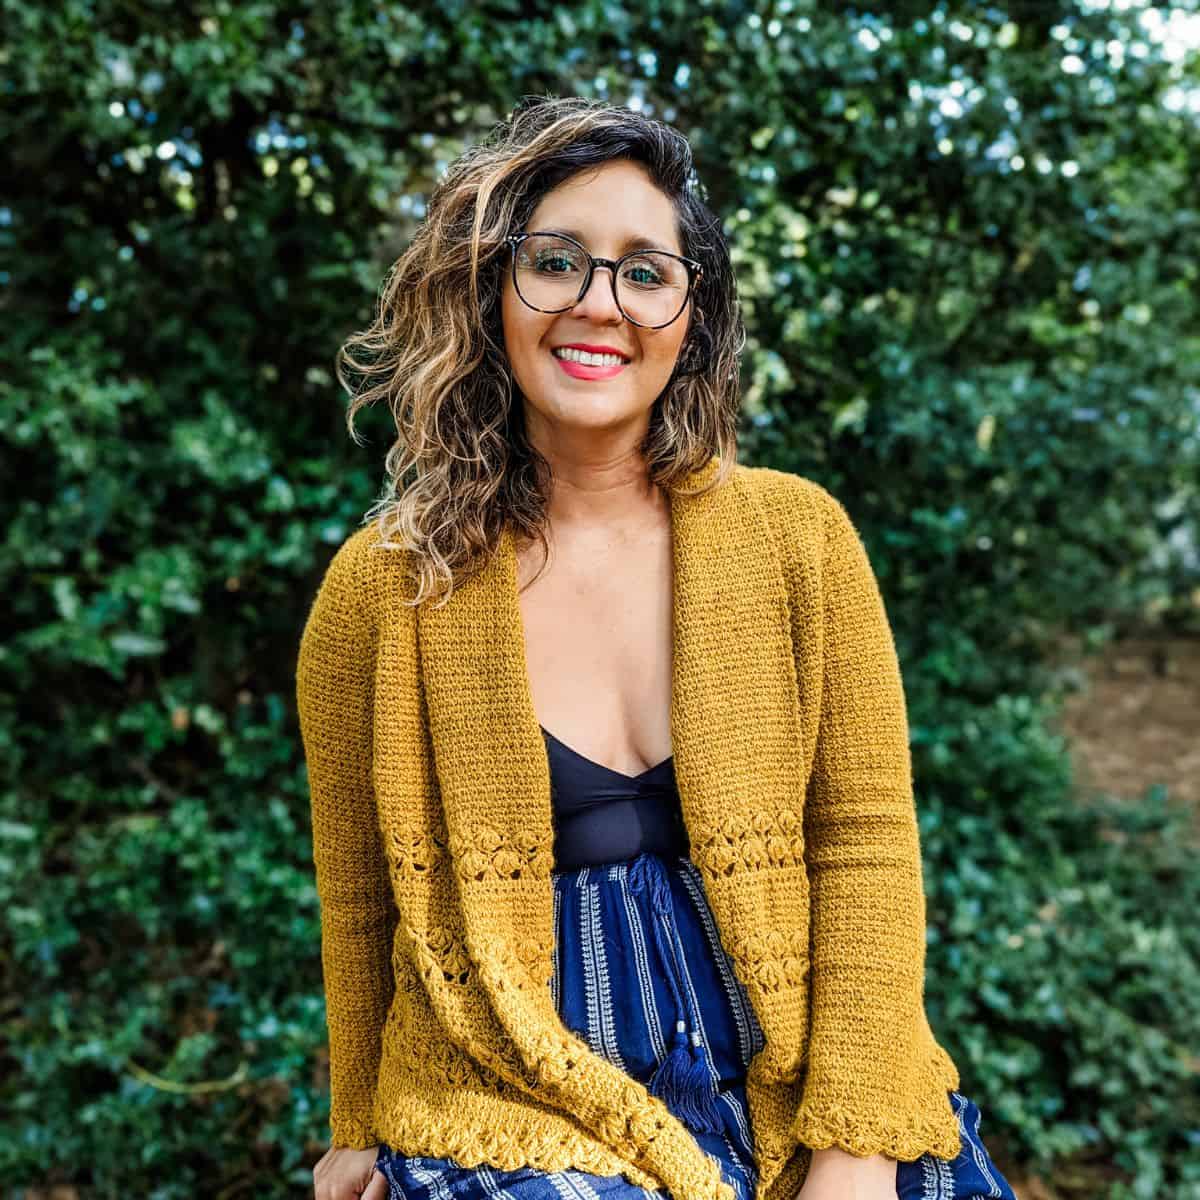 A woman wearing glasses and a yellow crochet cardigan sitting on a bench.